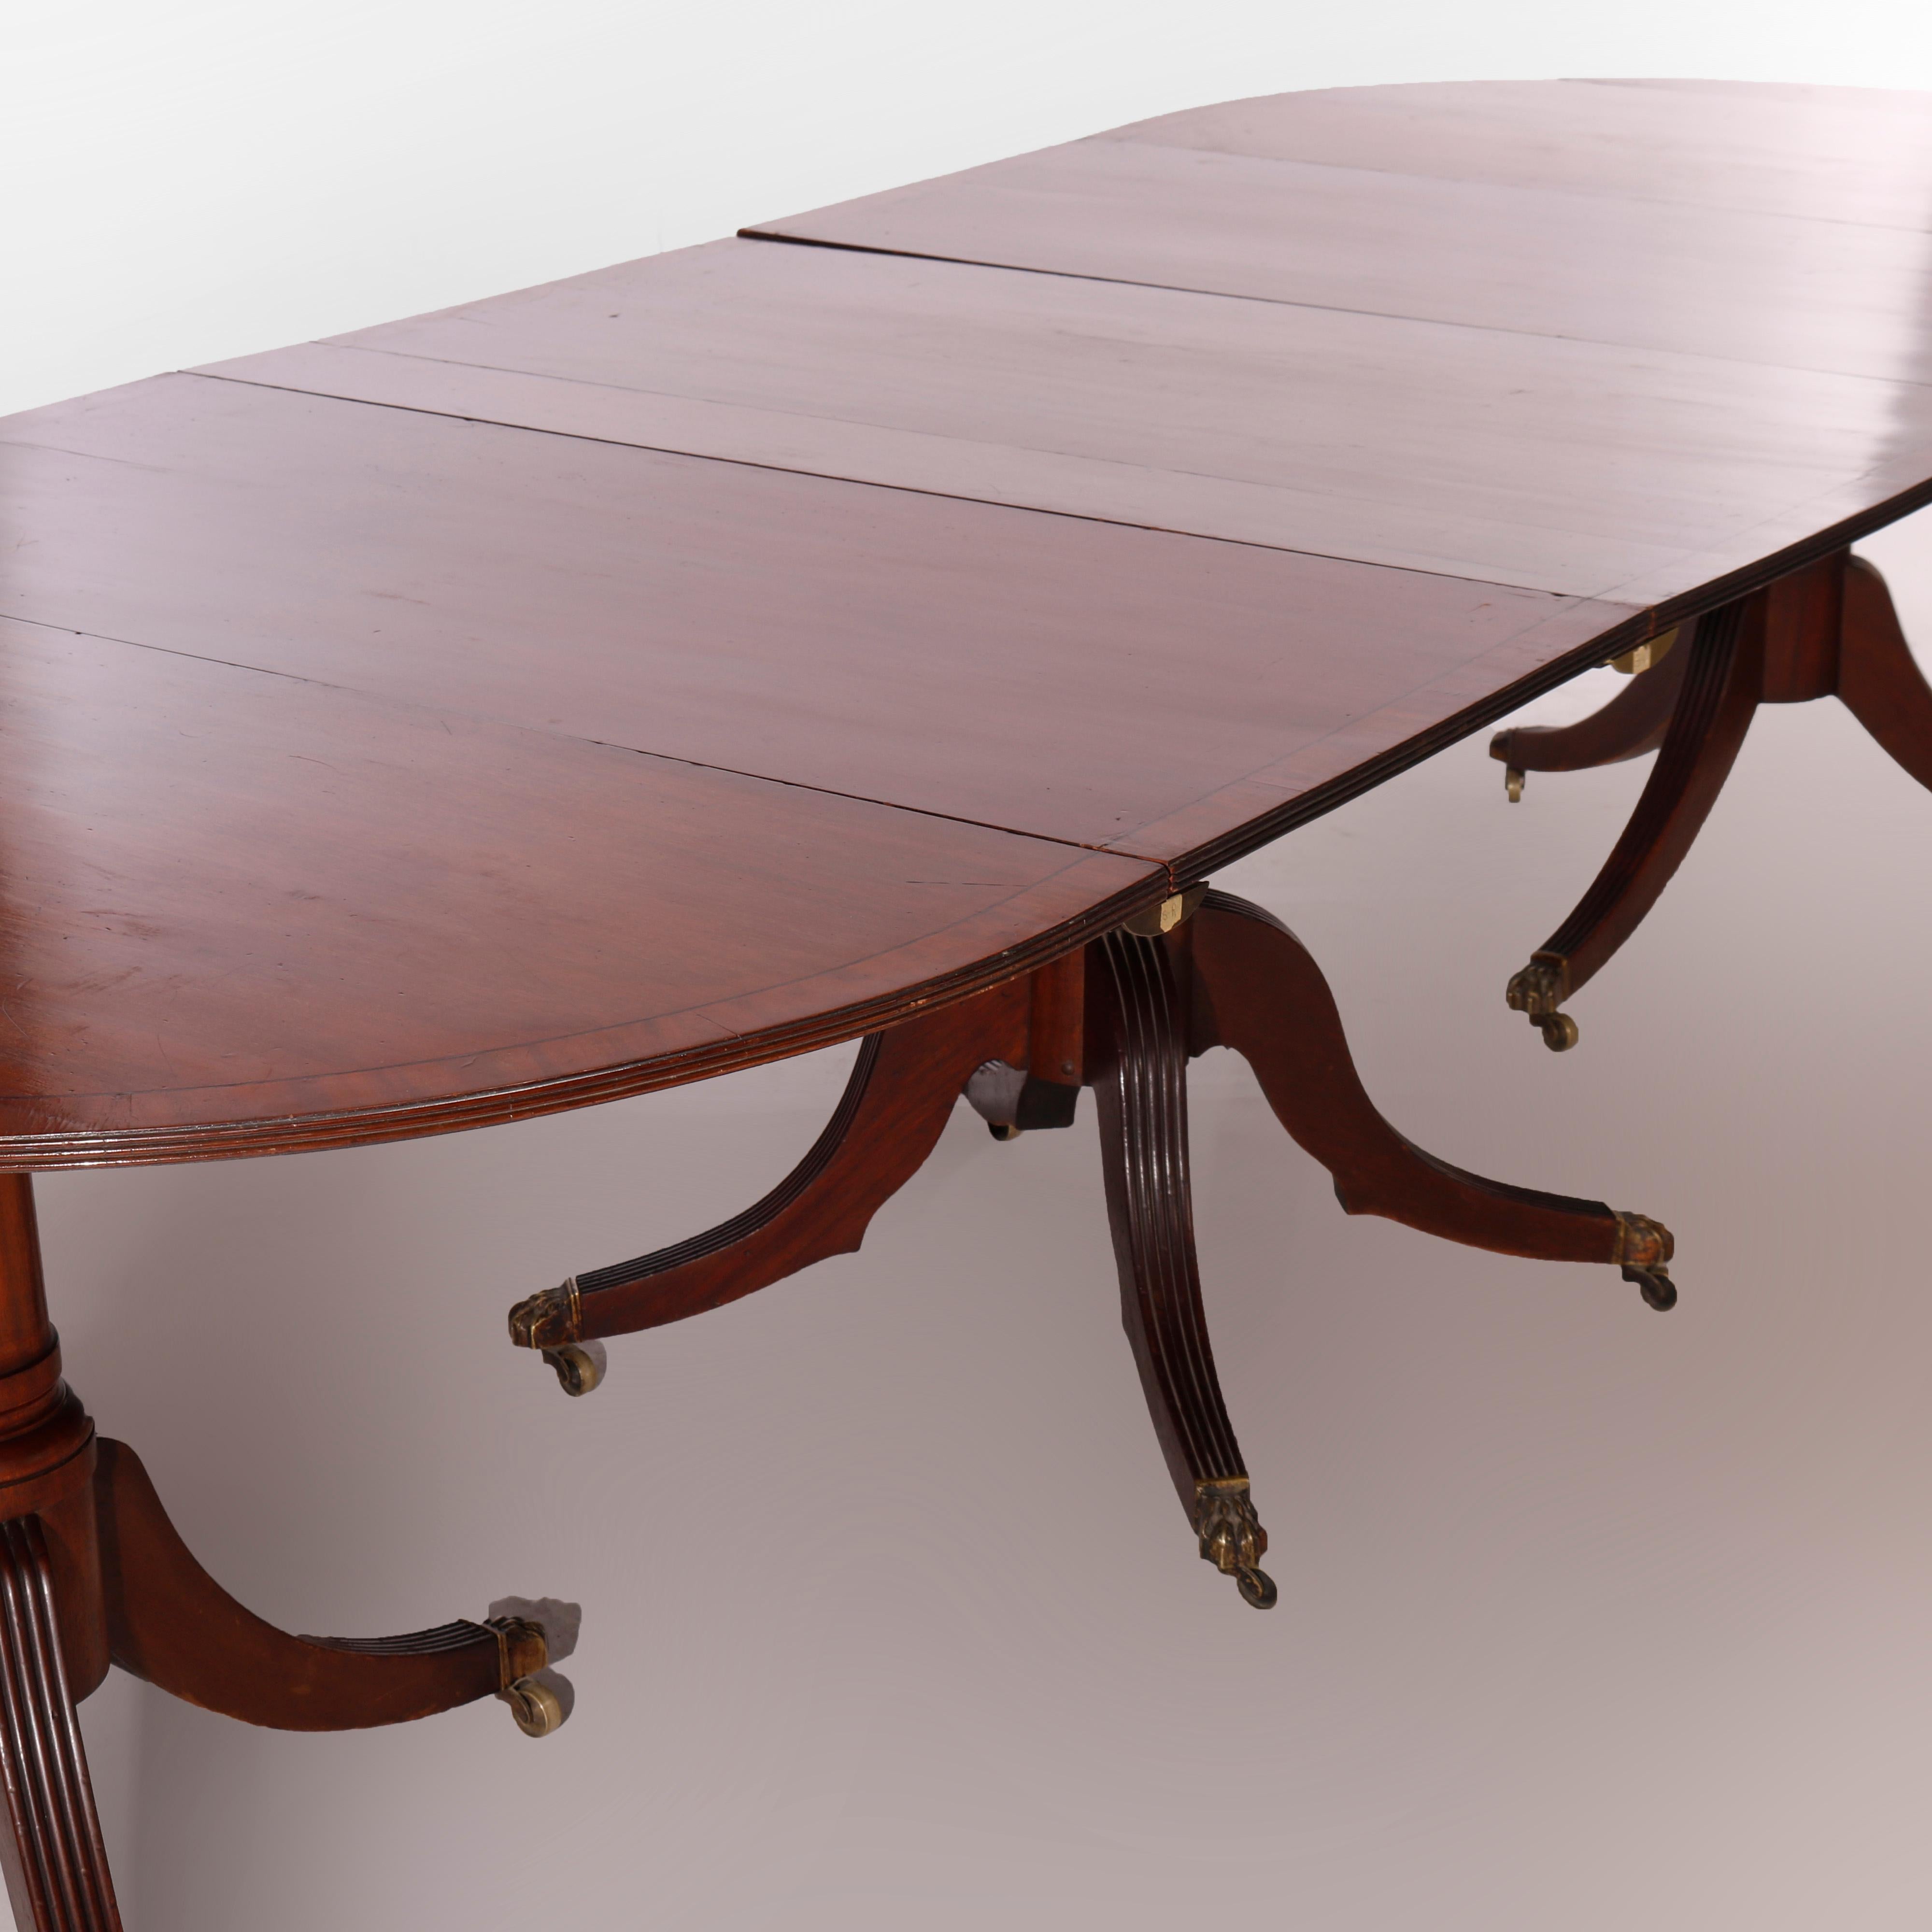 19th Century Antique Georgian Mahogany Triple Pedestal Dining Table with 2 Leaves, 19th C